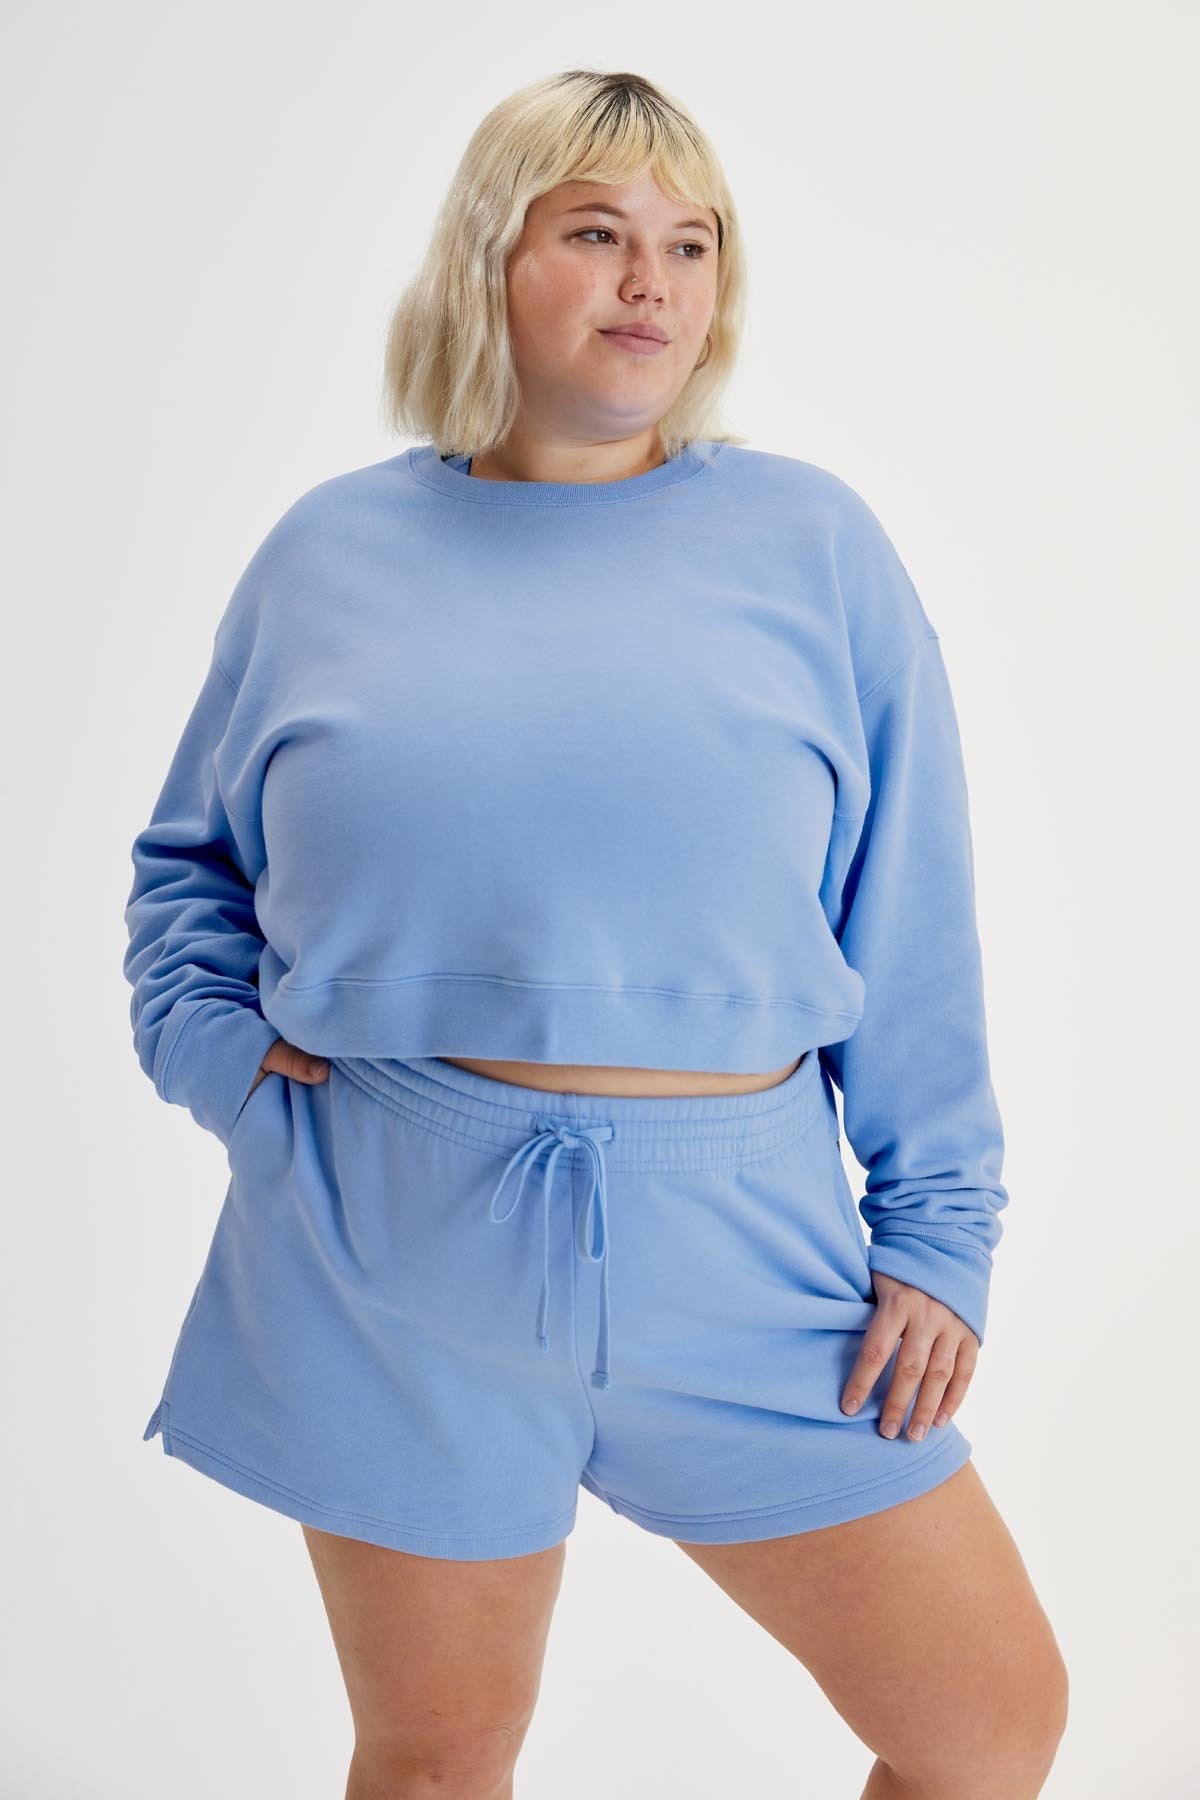 Bluejay 50/50 Cropped Sweatshirt — Girlfriend Collective